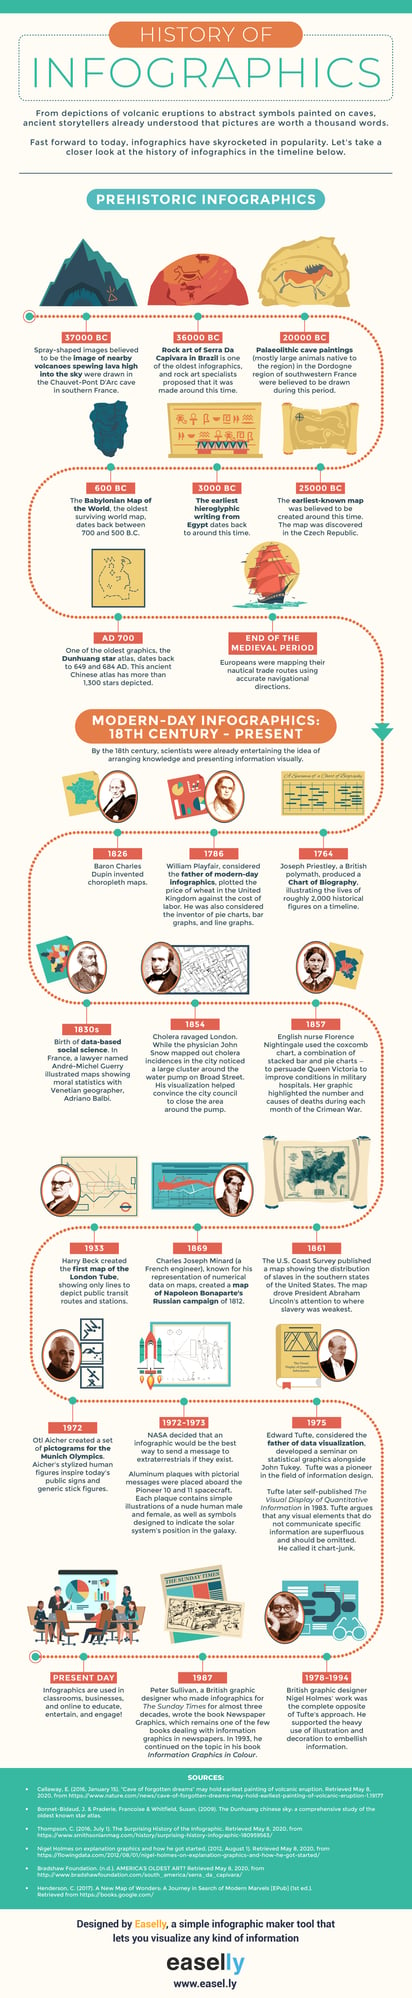 easelly history of infographics